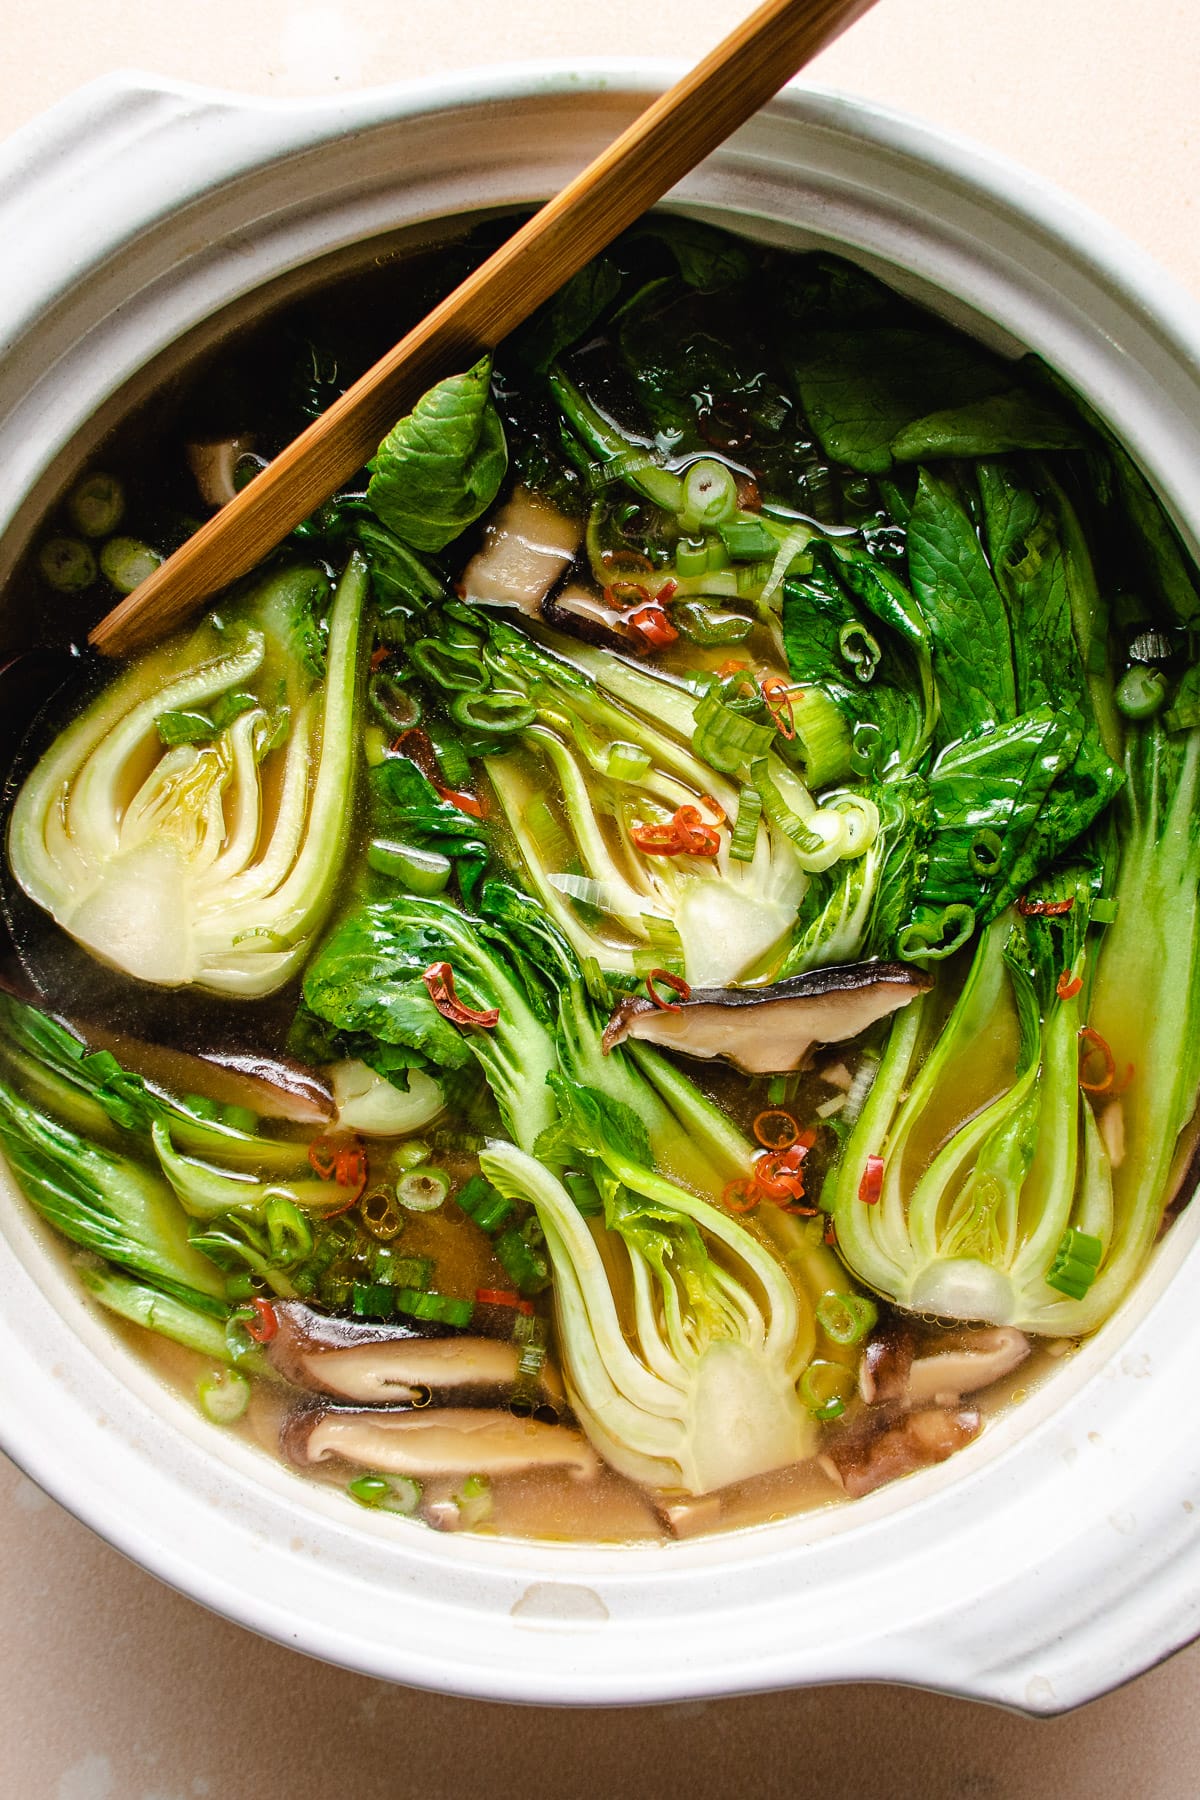 Photo shows baby bok choy cooked in a big white clay pot soup.